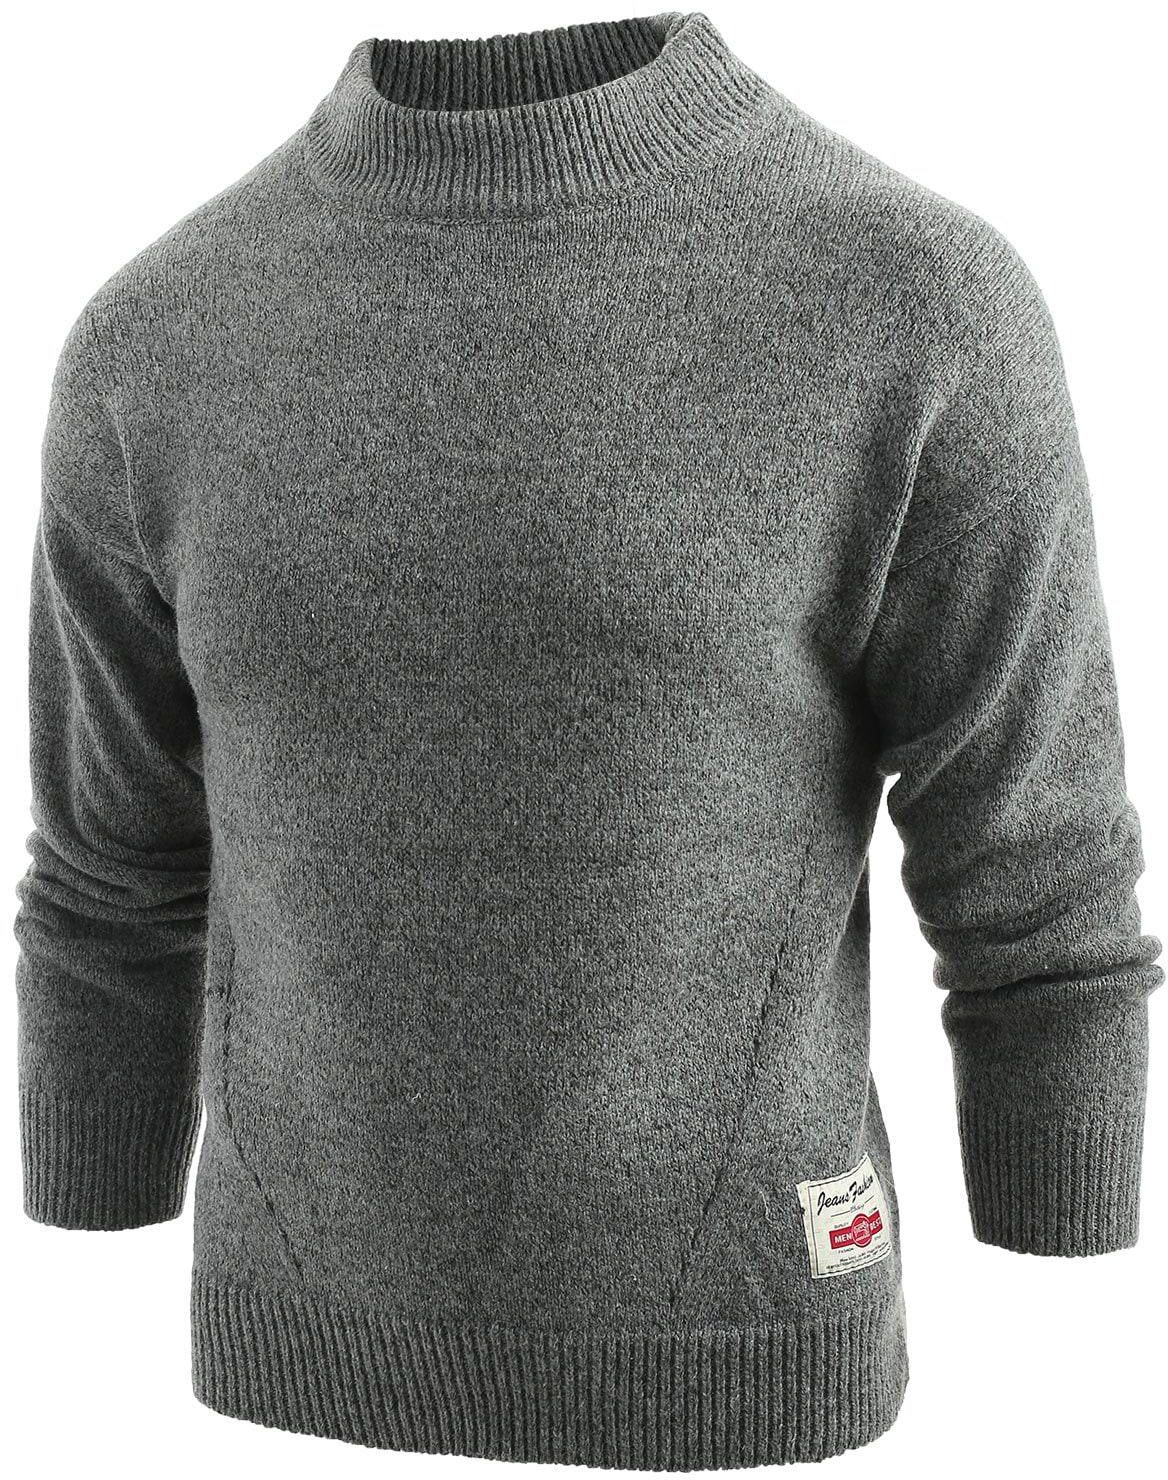 Long Sleeve Panel Pullover Sweater - L